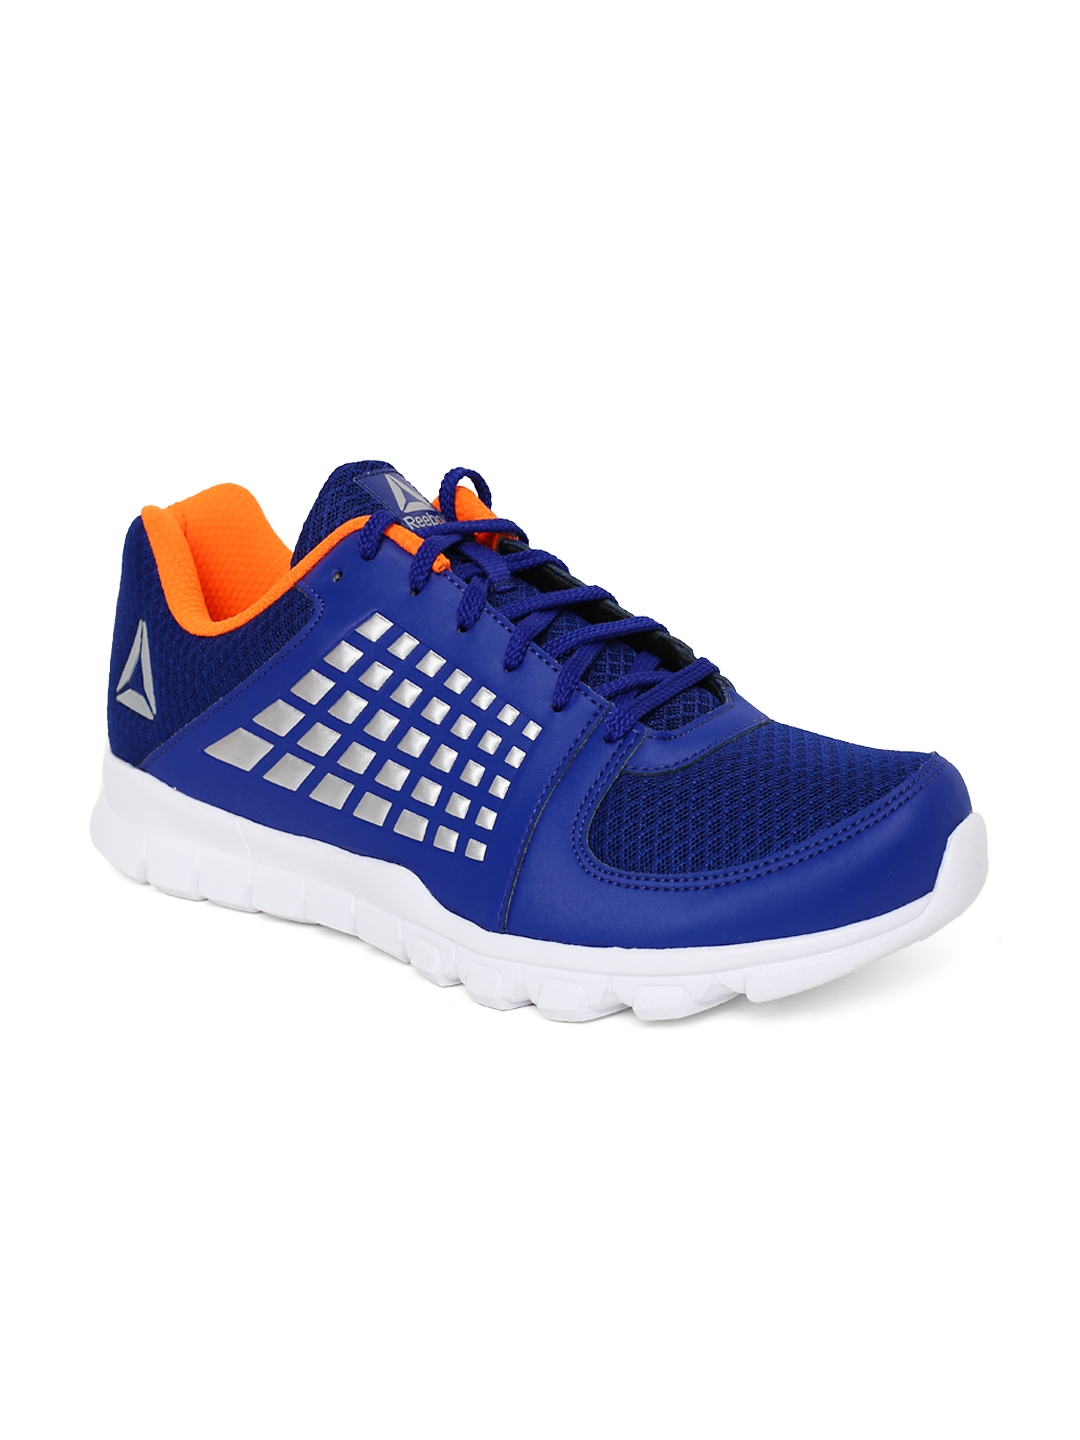 reebok electrify speed running shoes review